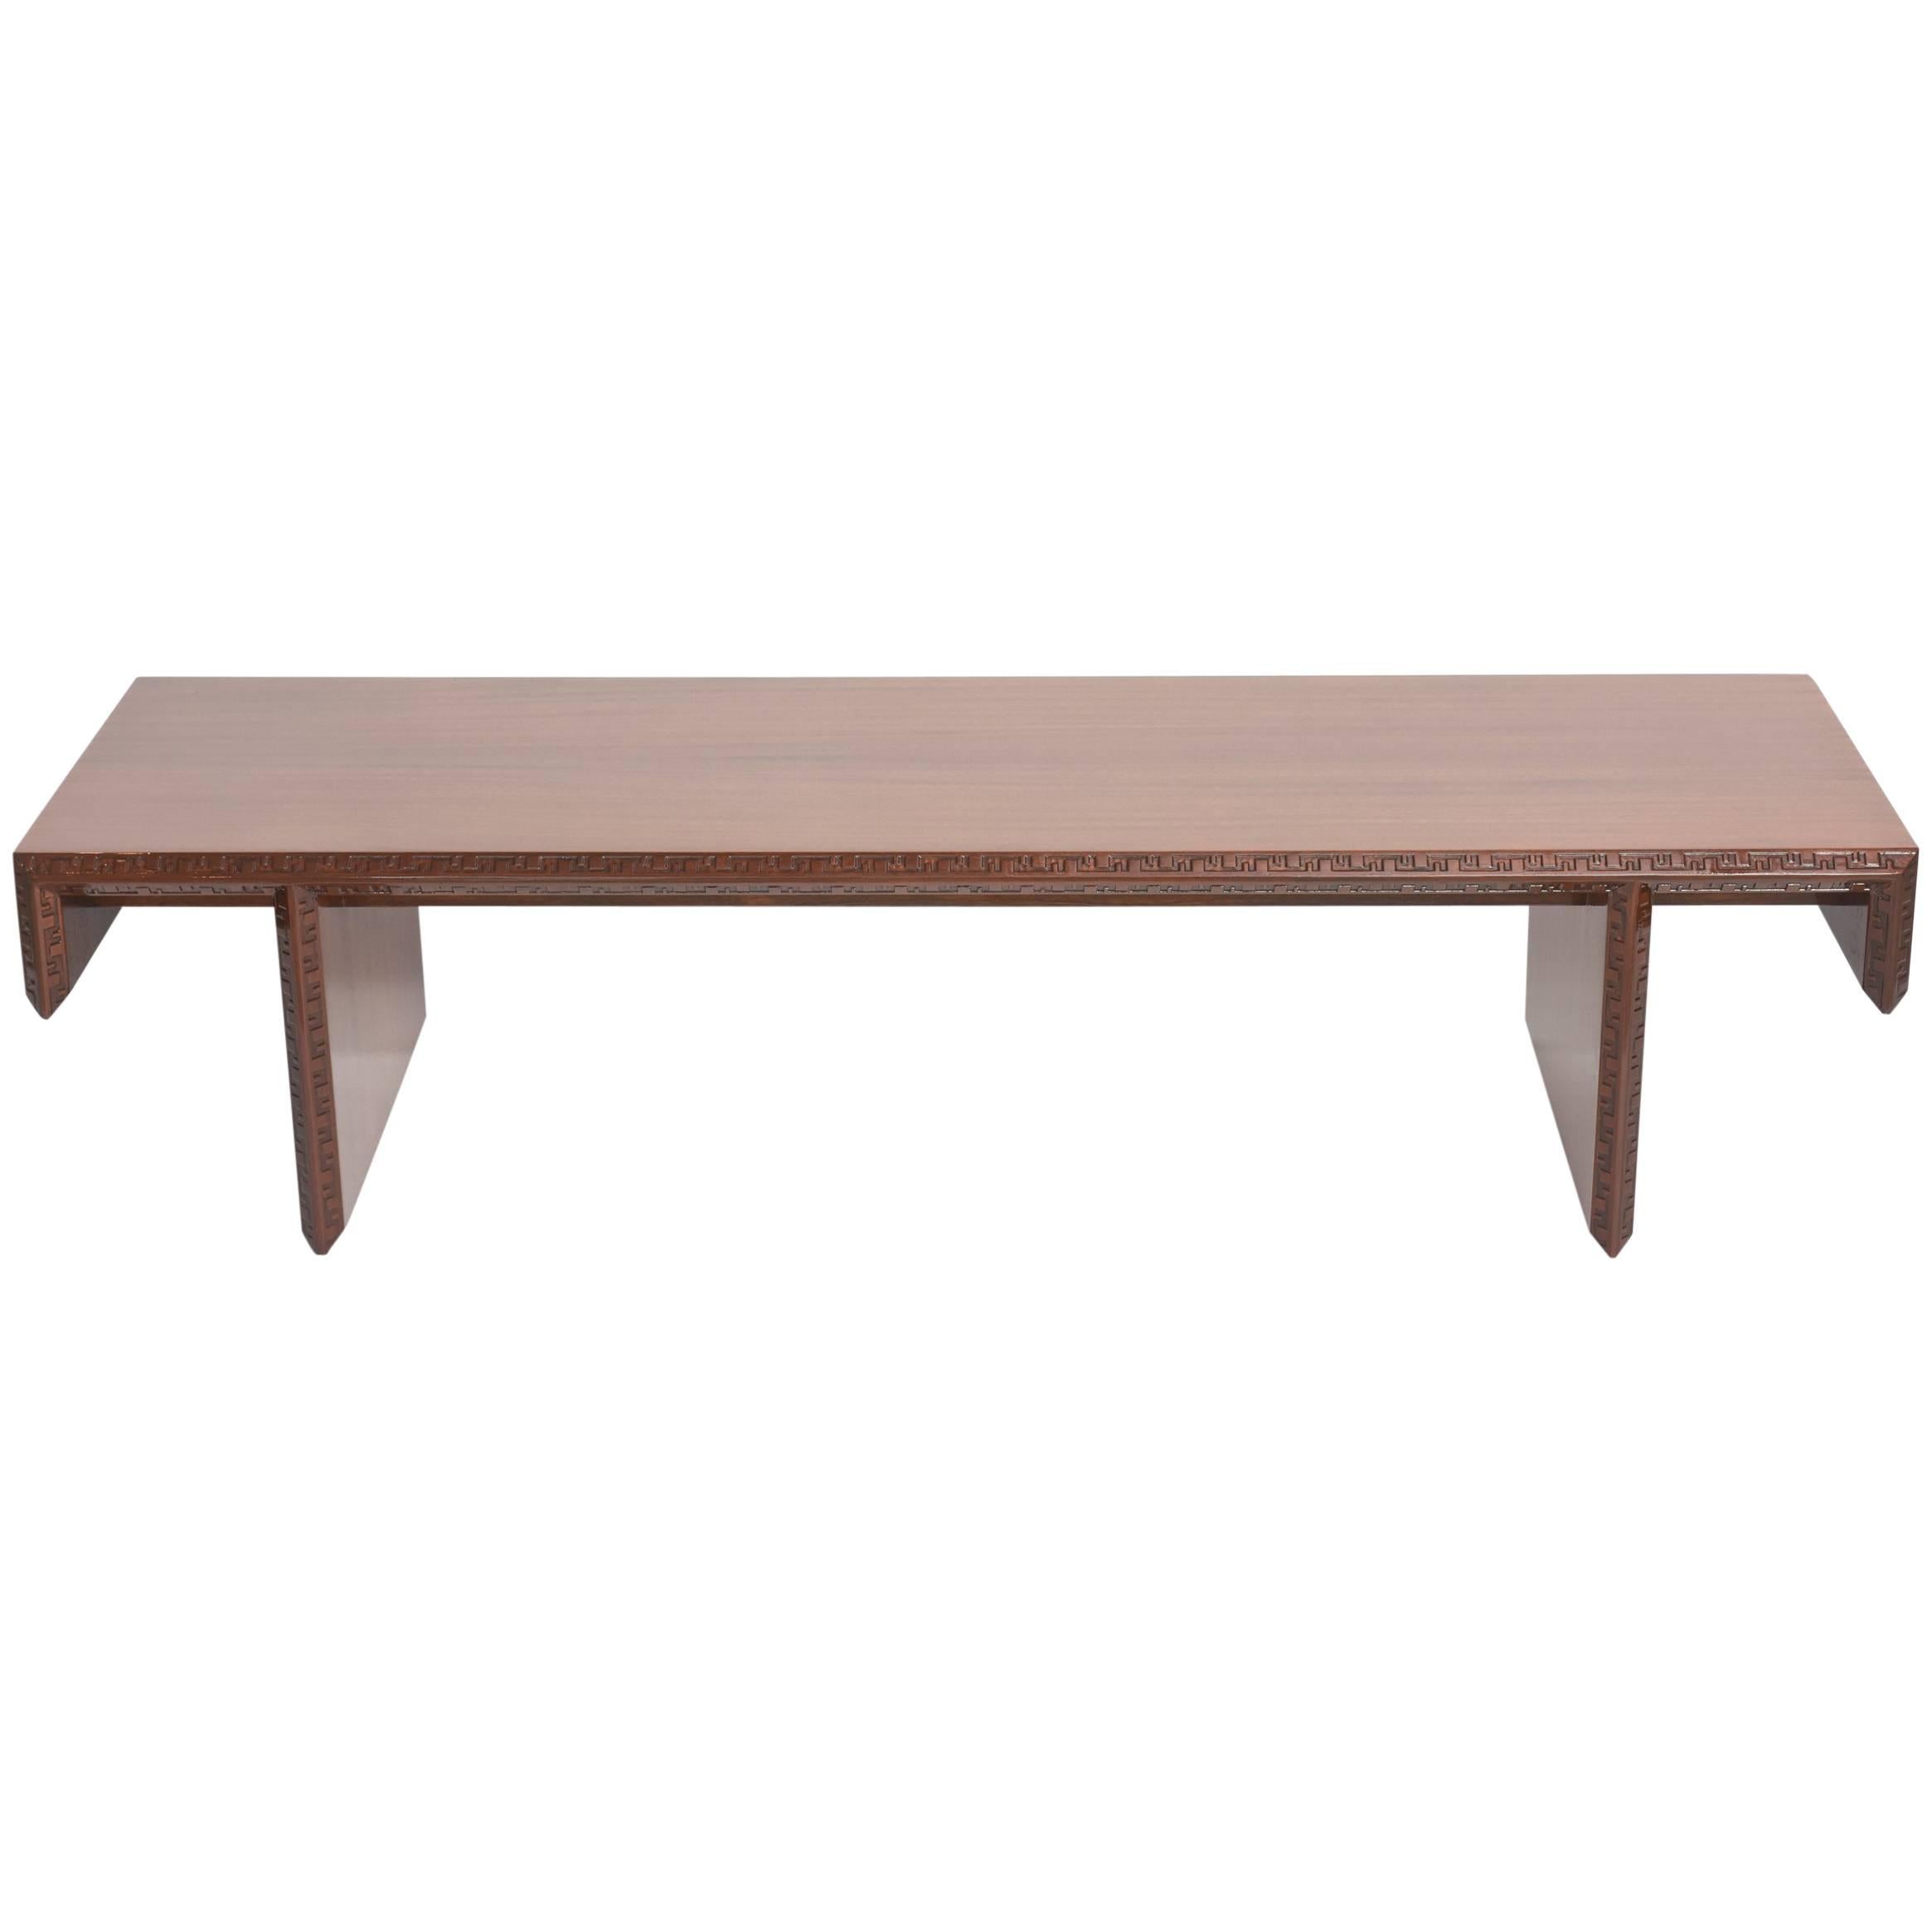 American Modern Mahogany "Taliesin Group" Low Table or Bench, Frank Lloyd Wright For Sale